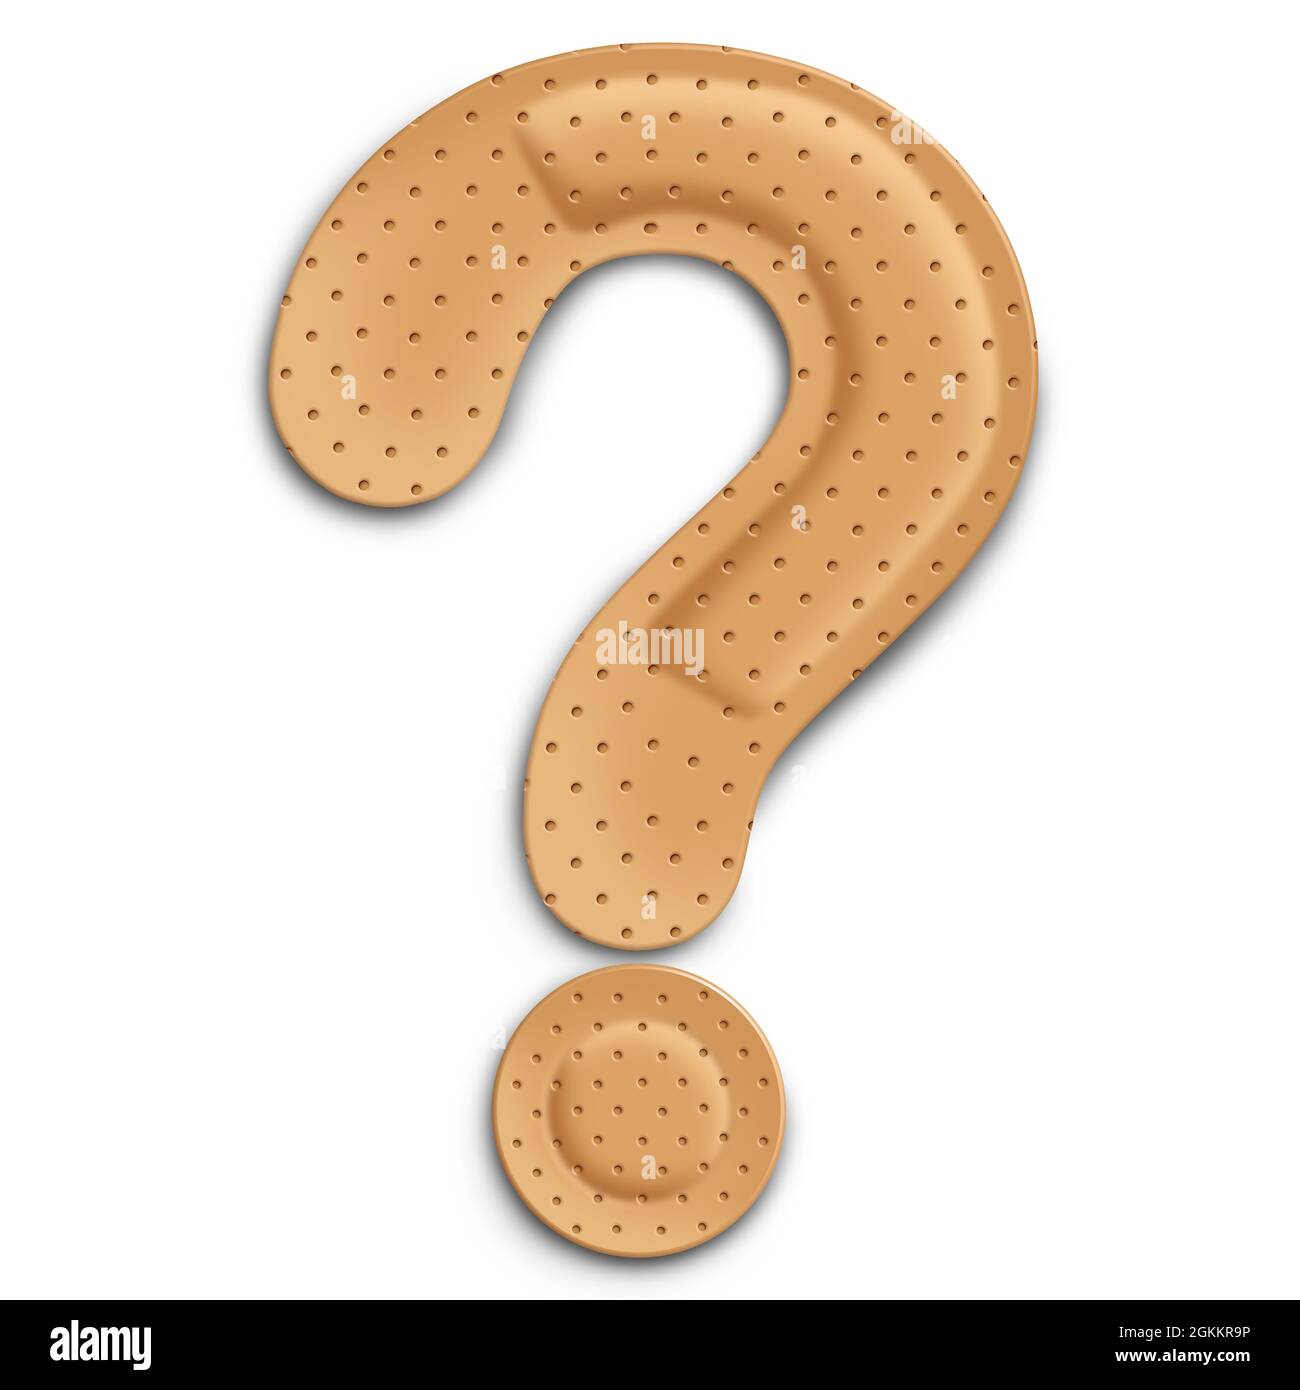 Treatment uncertainty and medical advice symbol or vaccination questions and immunization prevention medicine as adhesive bandages shaped. Stock Photo